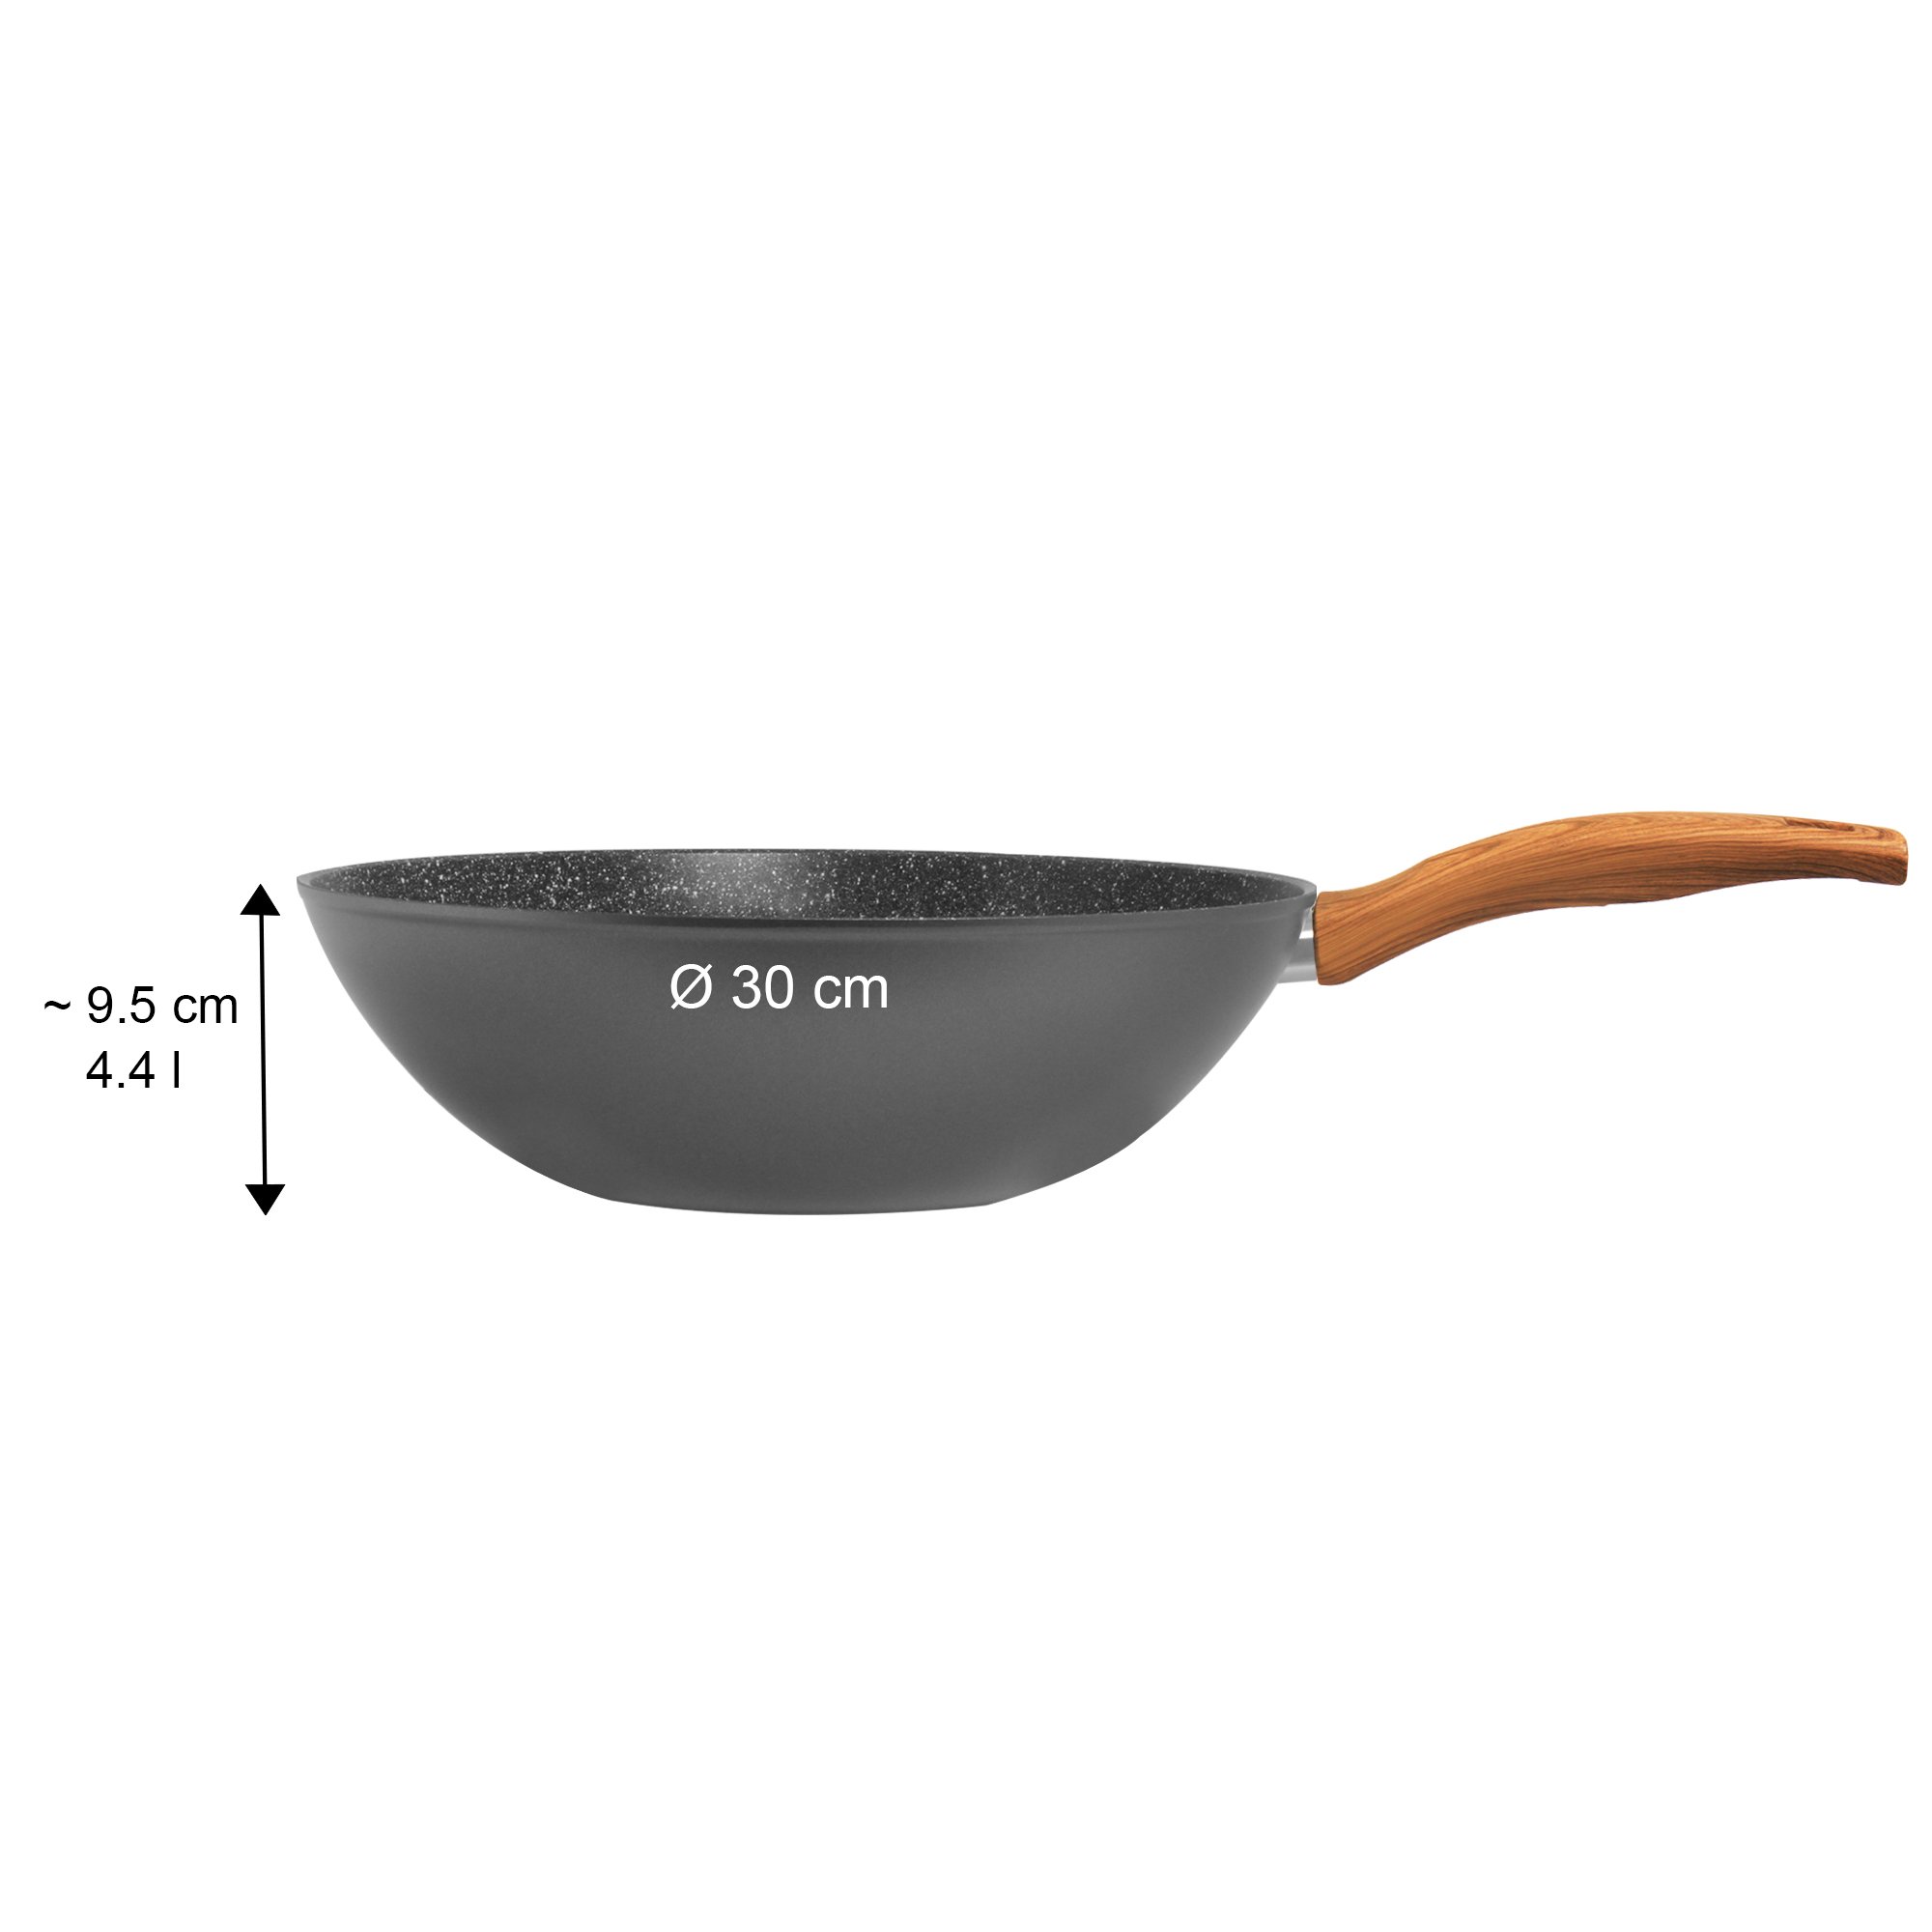 STONELINE® Poêle Wok antiadhésive 30 cm, Motif bois, Made in Germany | Back to Nature